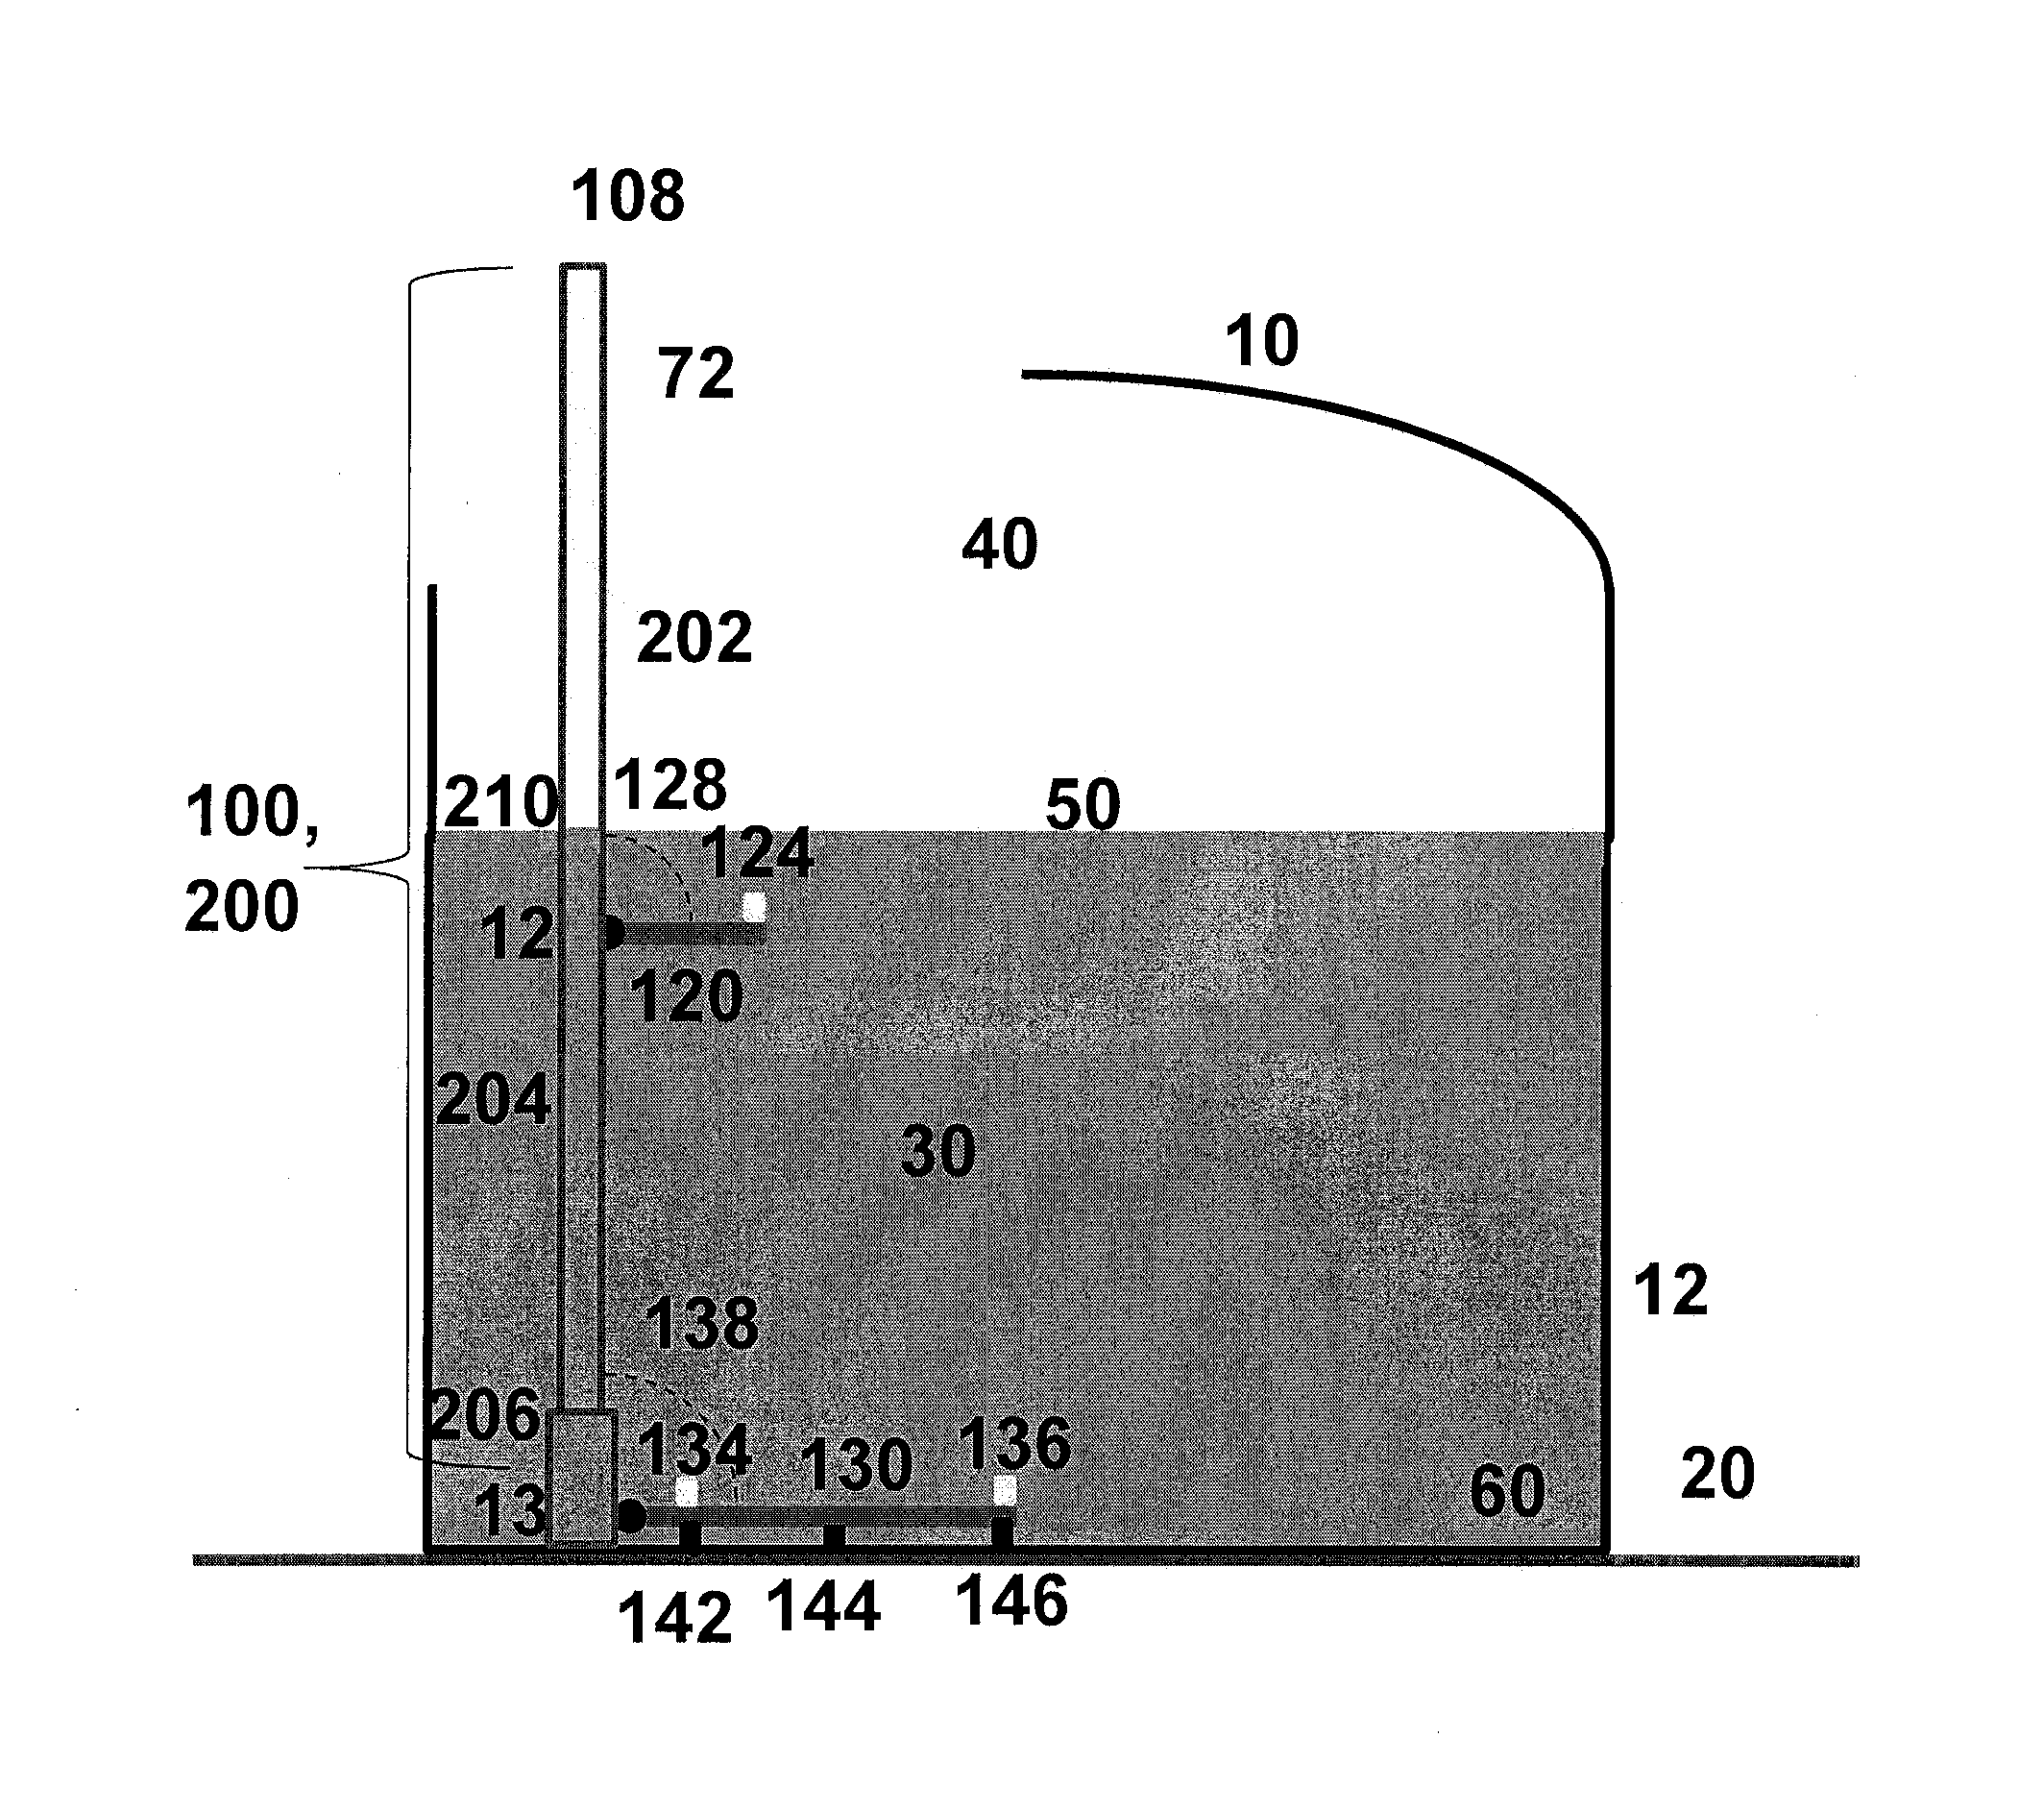 Method for Extending the Time Between Out-of-Service, In-Tank Inspections Using Ultrasonic Sensor